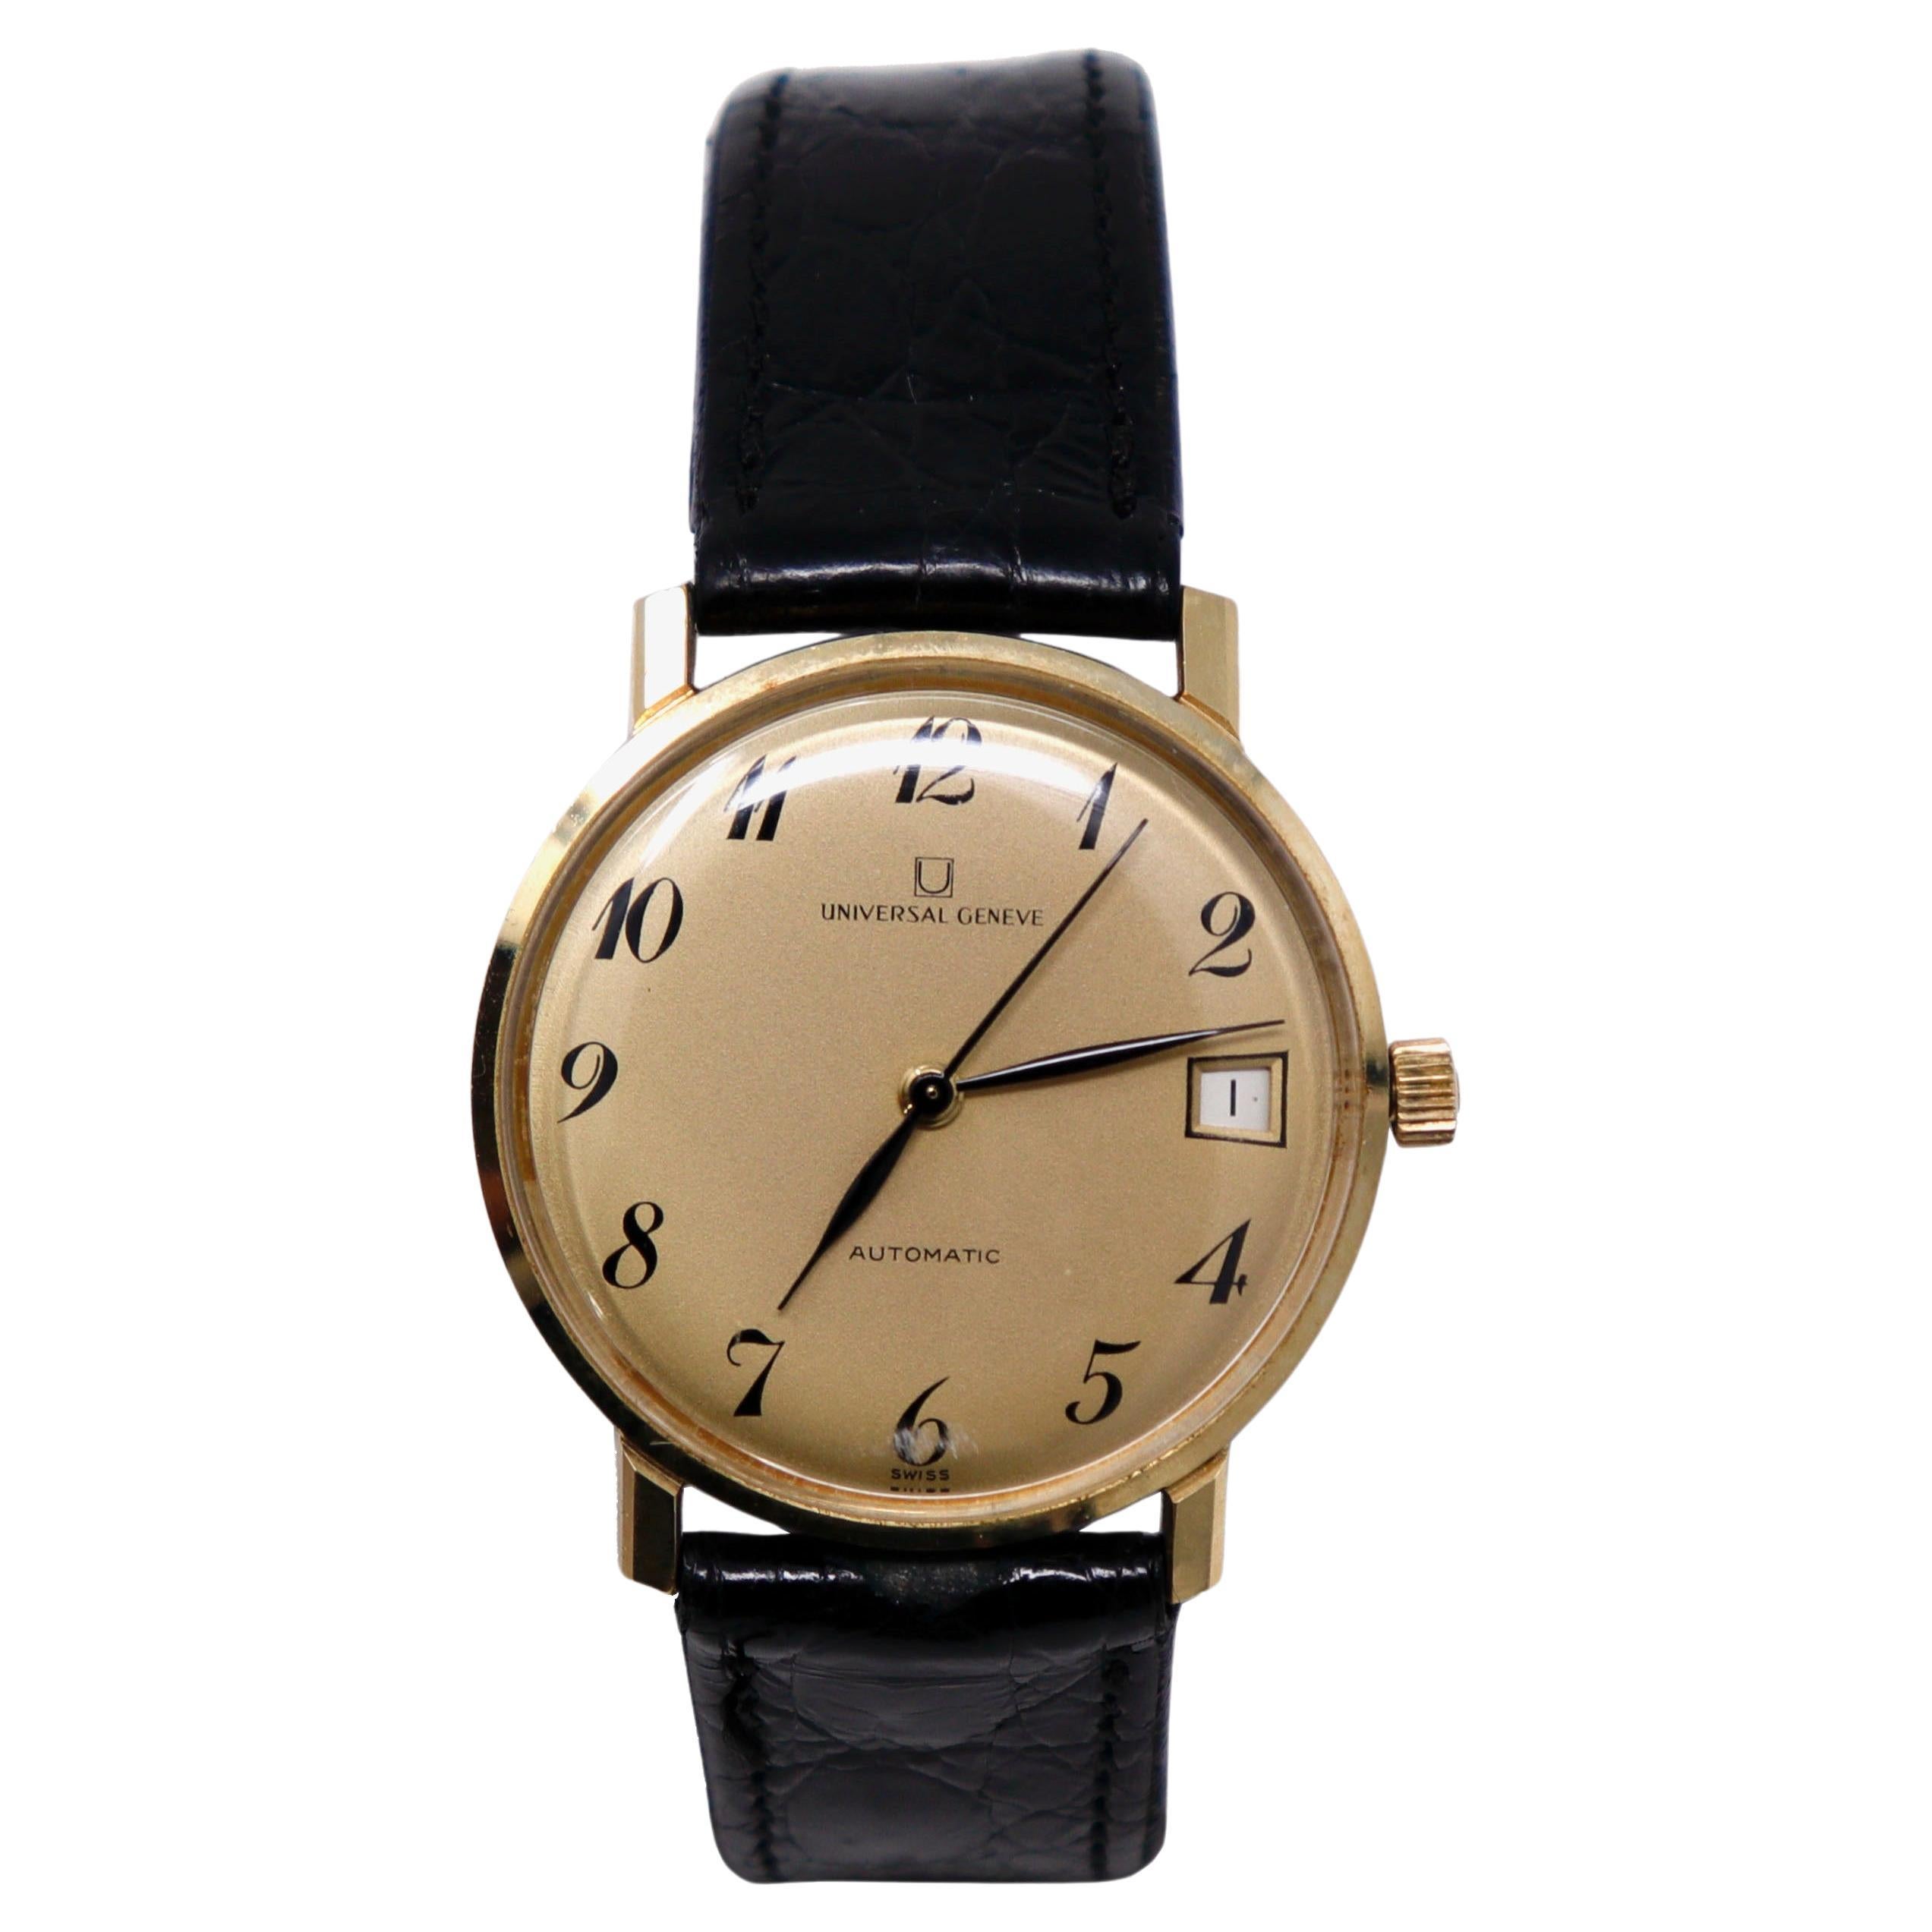 Universal Geneve, Automatic 14K Yellow Gold Men's Wrist Watch For Sale